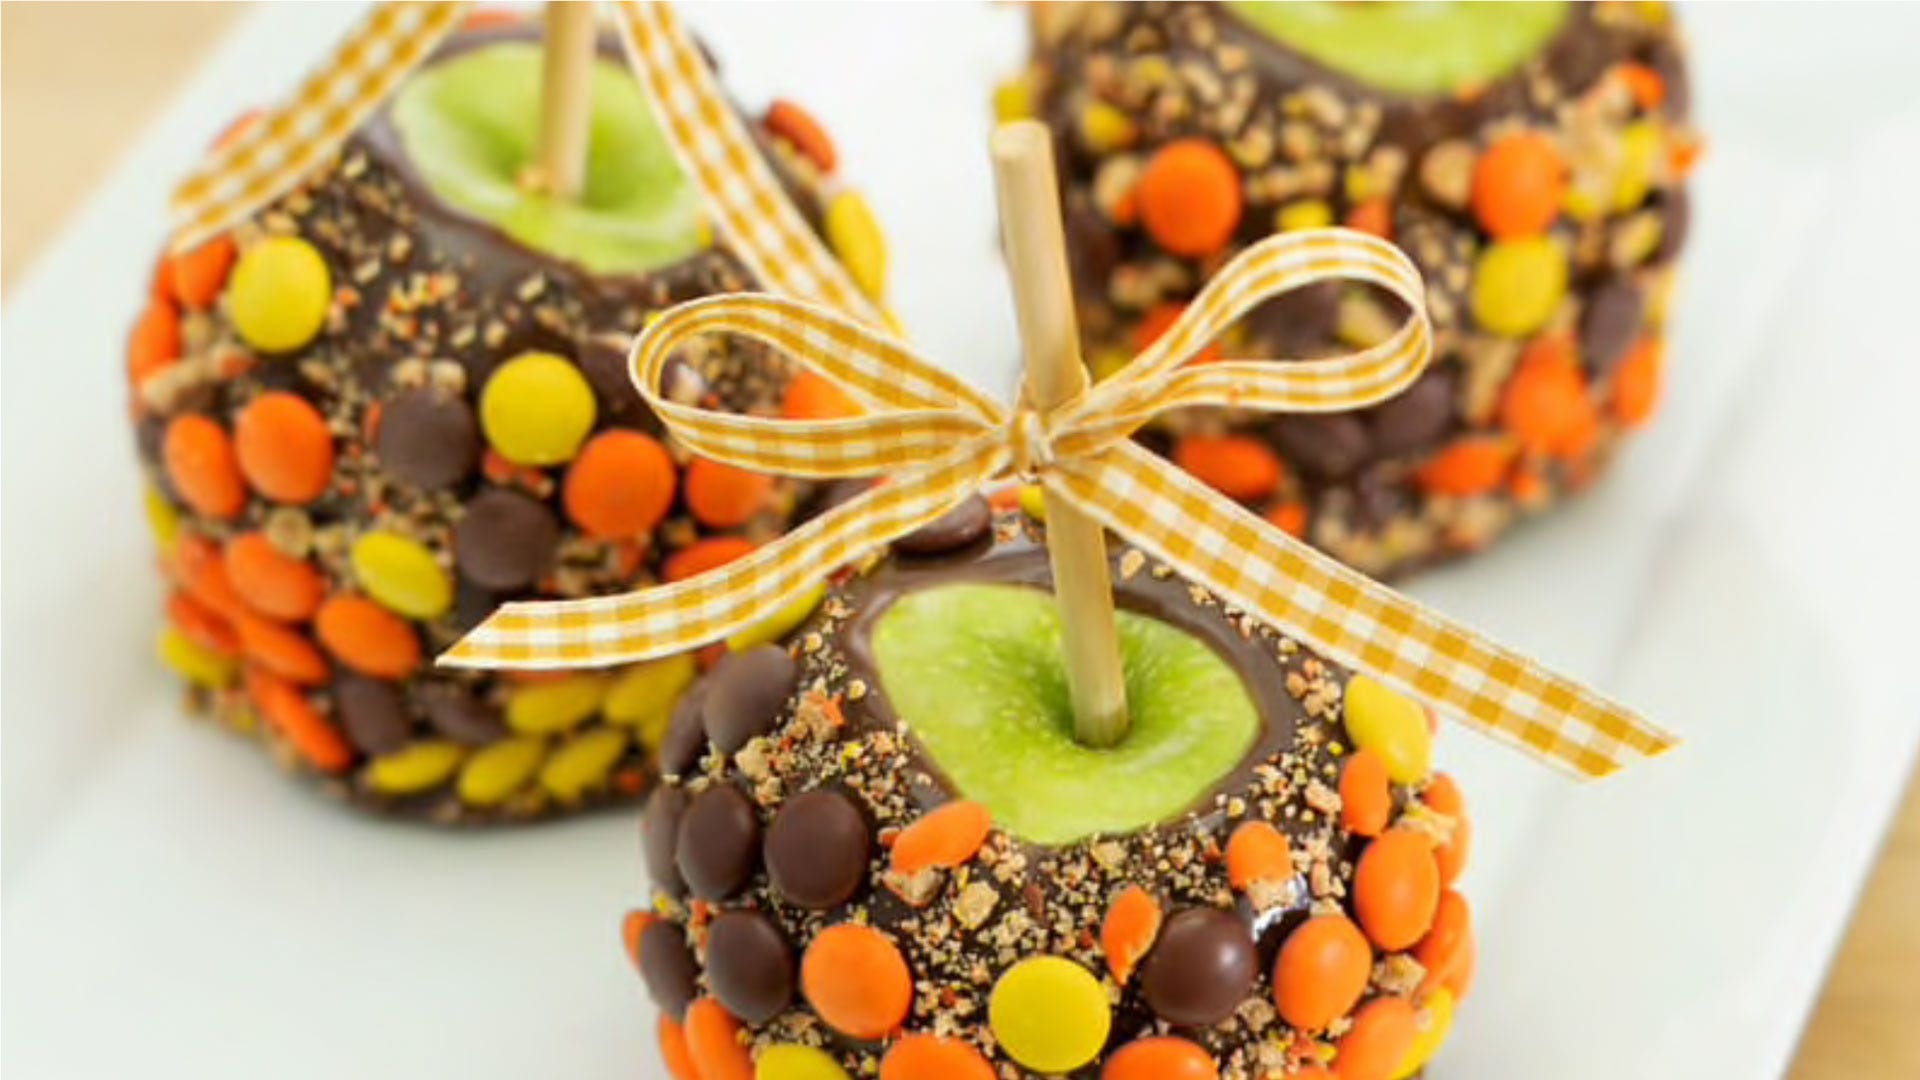 REESE'S PIECES Candy Chocolate and Caramel Apple